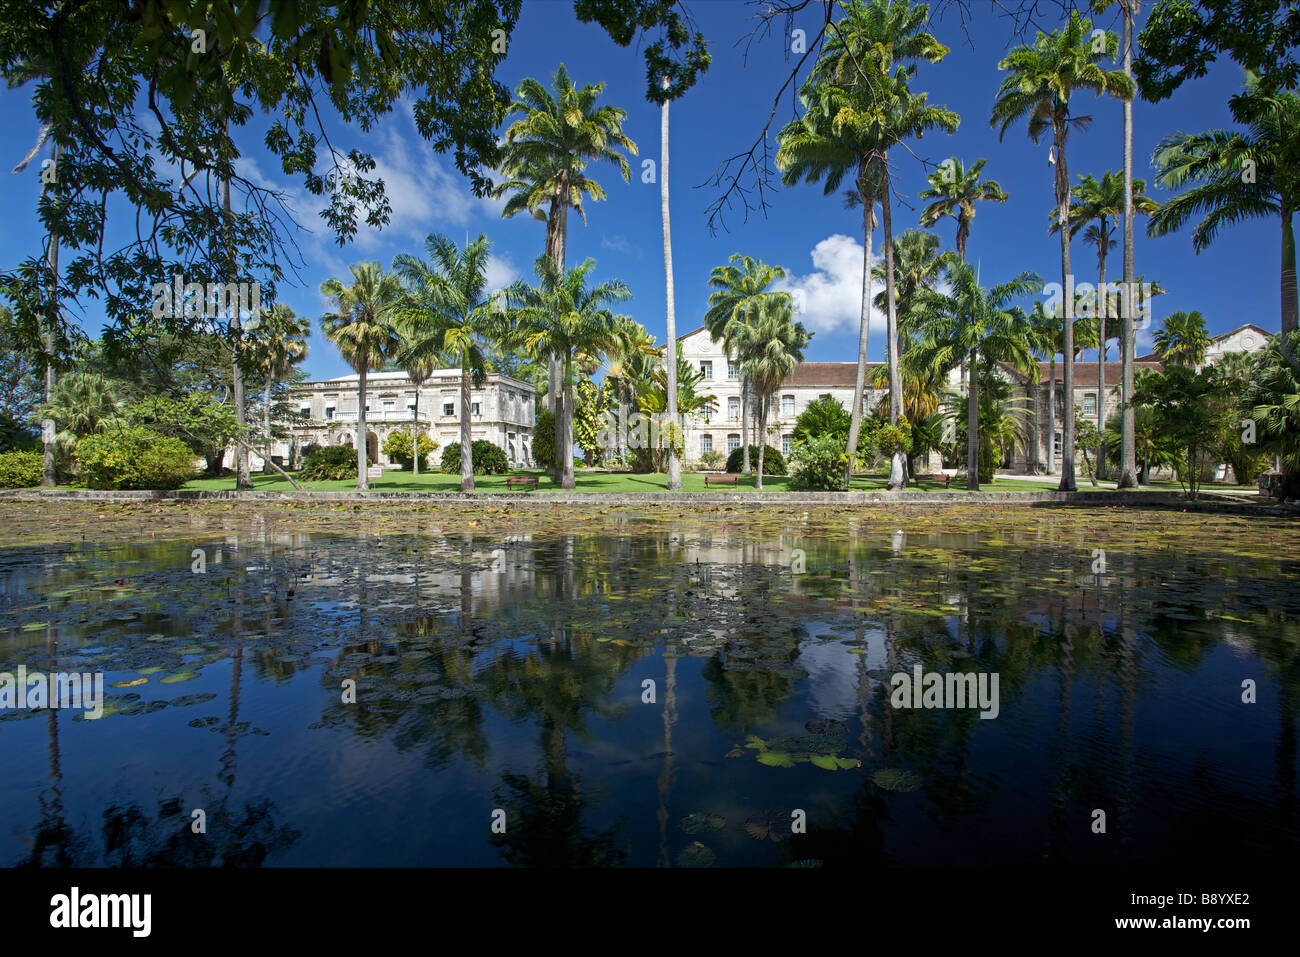 Lily pond at Codrington College, the oldest Anglican theological college in the Western Hemisphere, Barbados, 'West Indies' Stock Photo